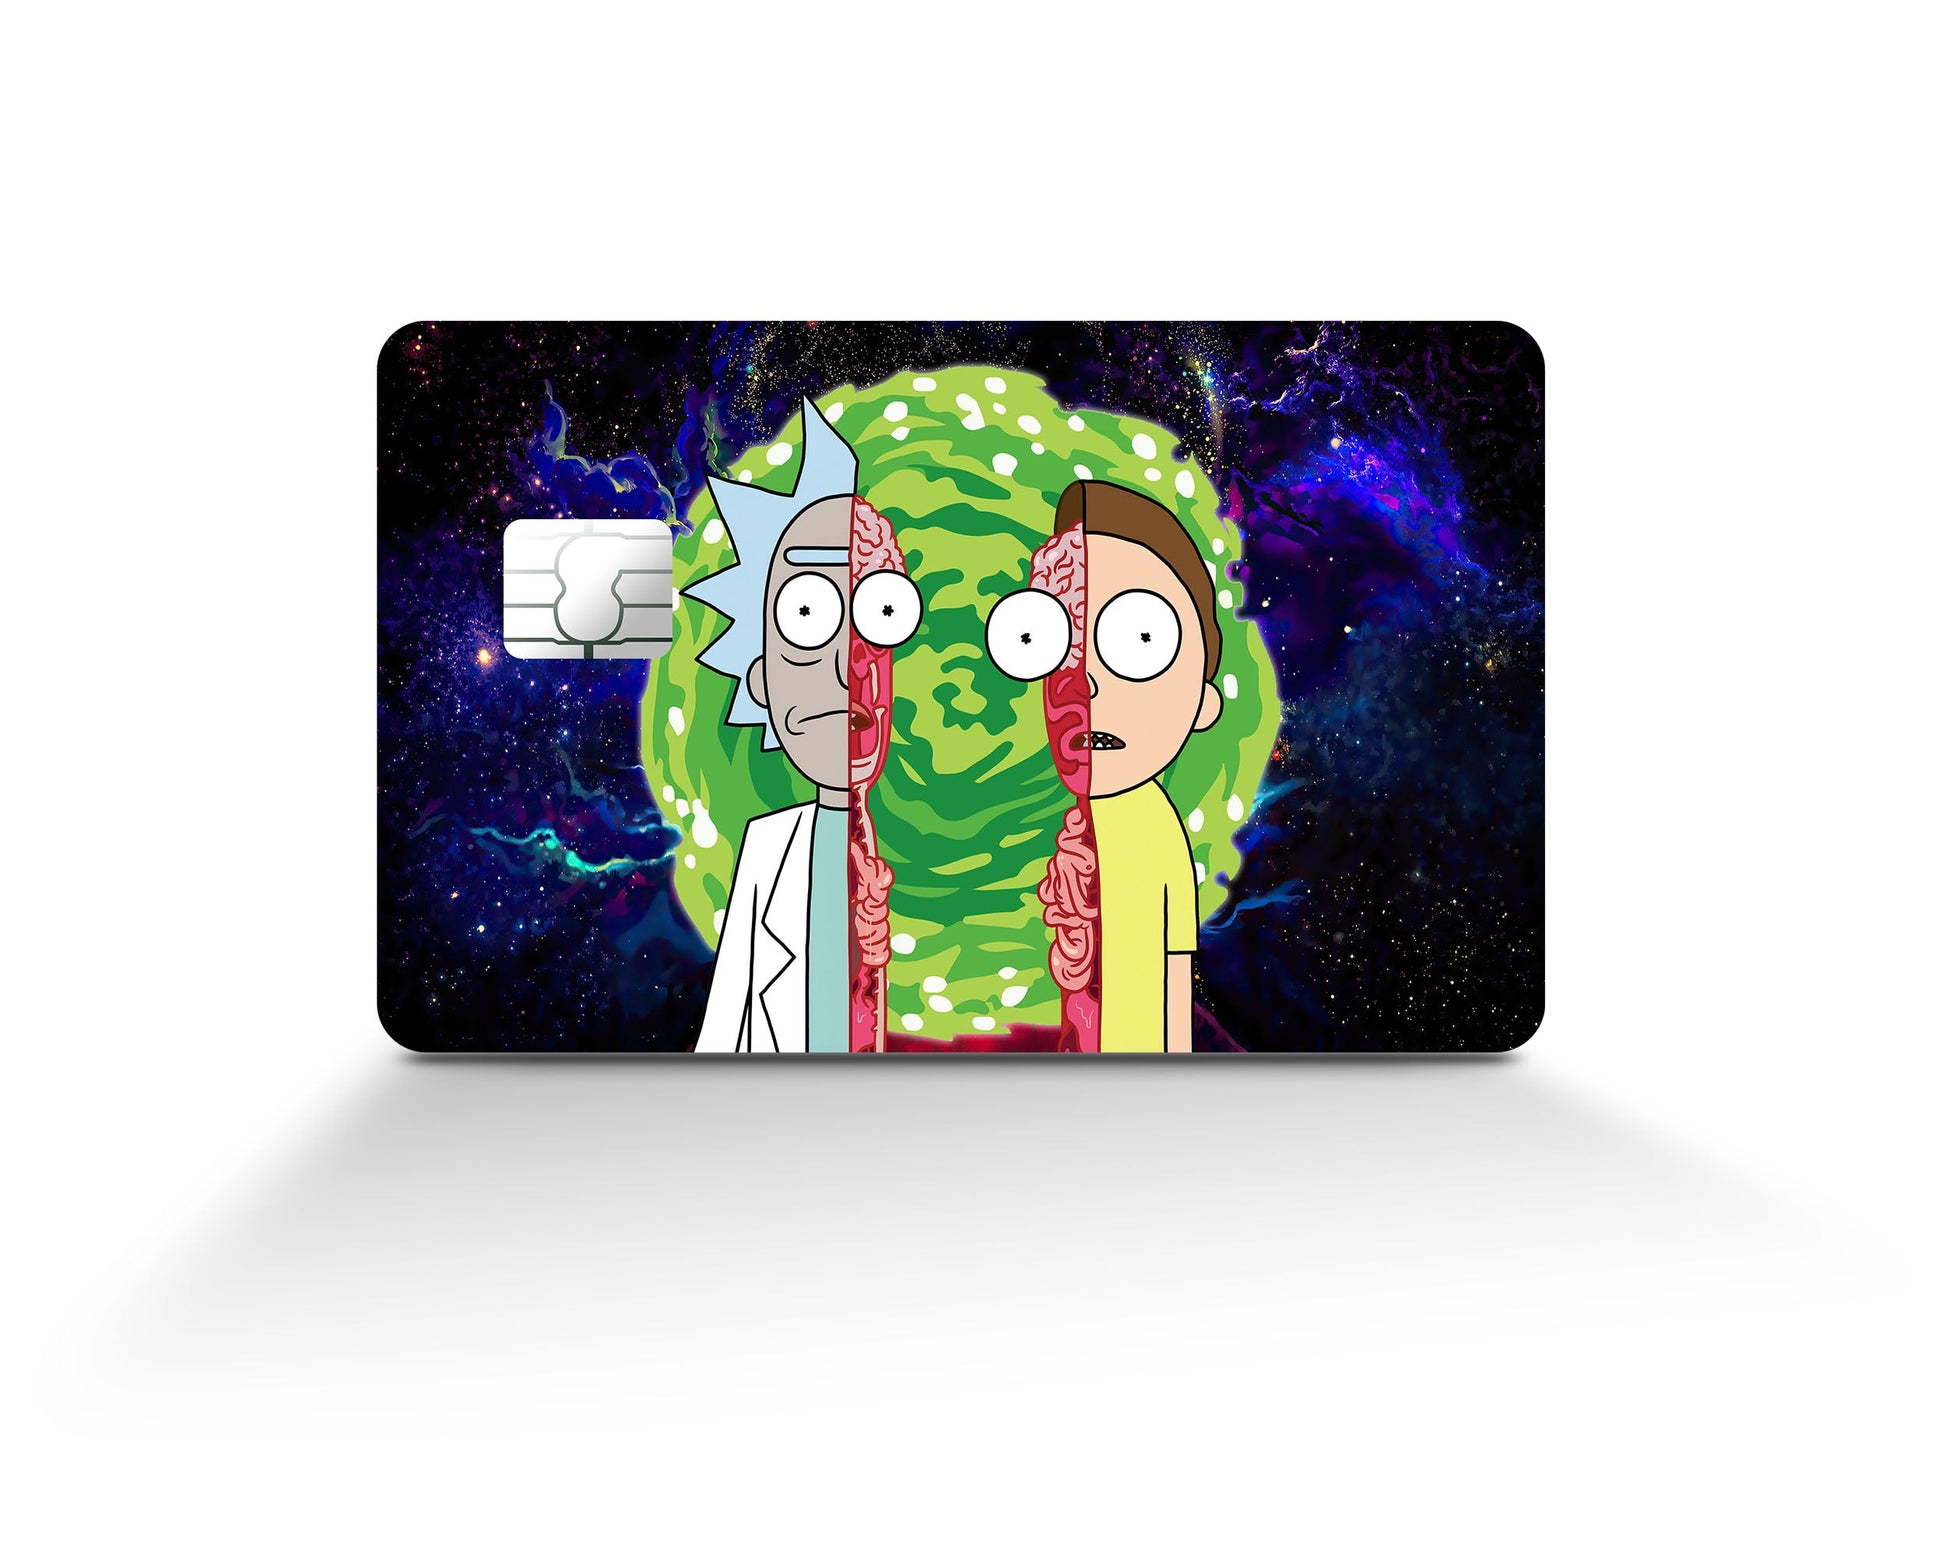 Anime Town Creations Credit Card Rick and Morty Portal Split Full Skins - Anime Rick and Morty Credit Card Skin